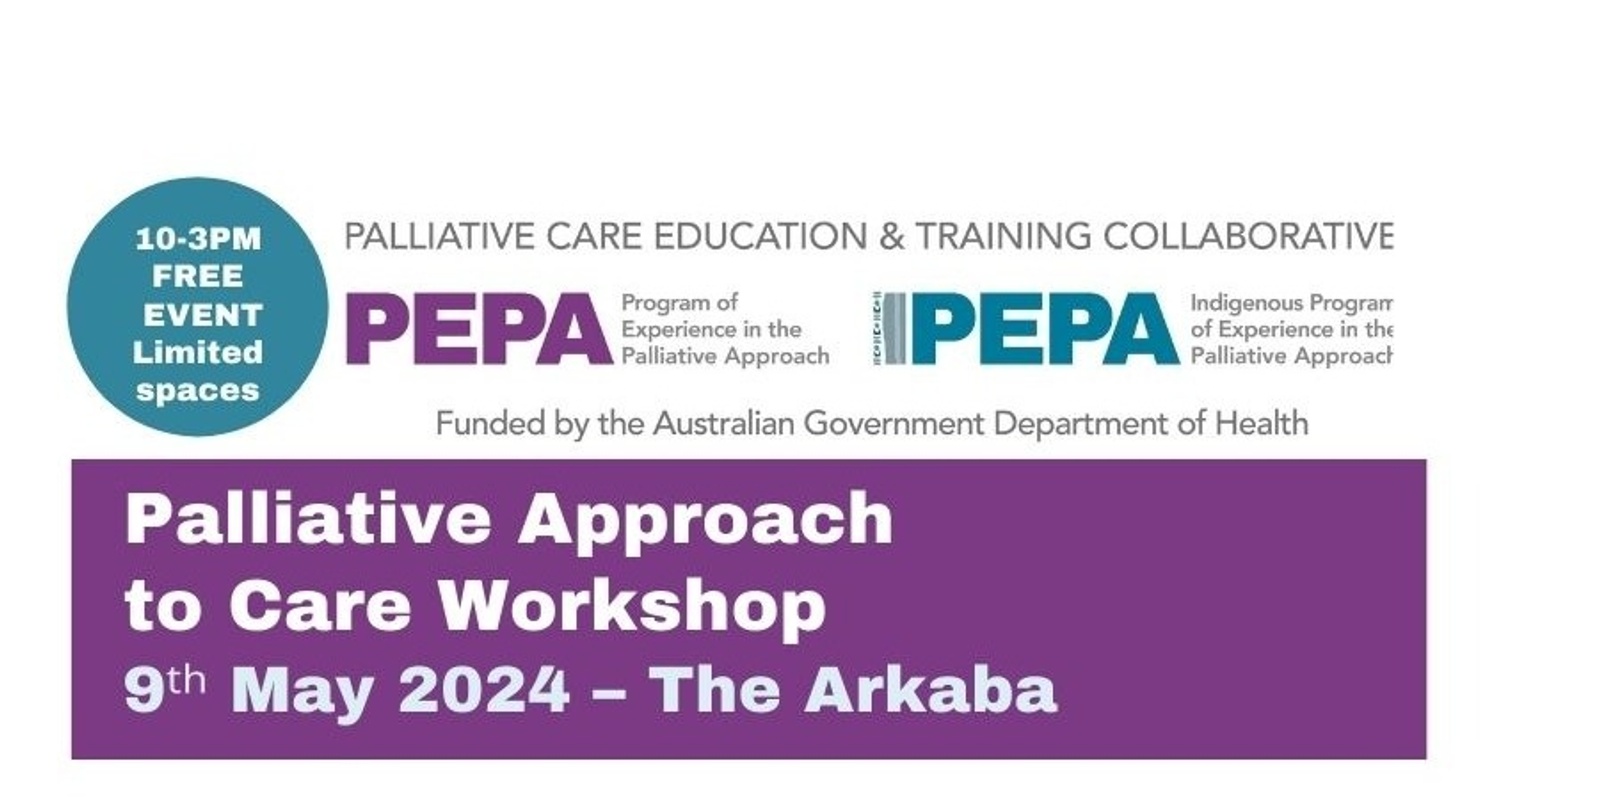 Banner image for PEPA Palliative Approach to Care Workshop